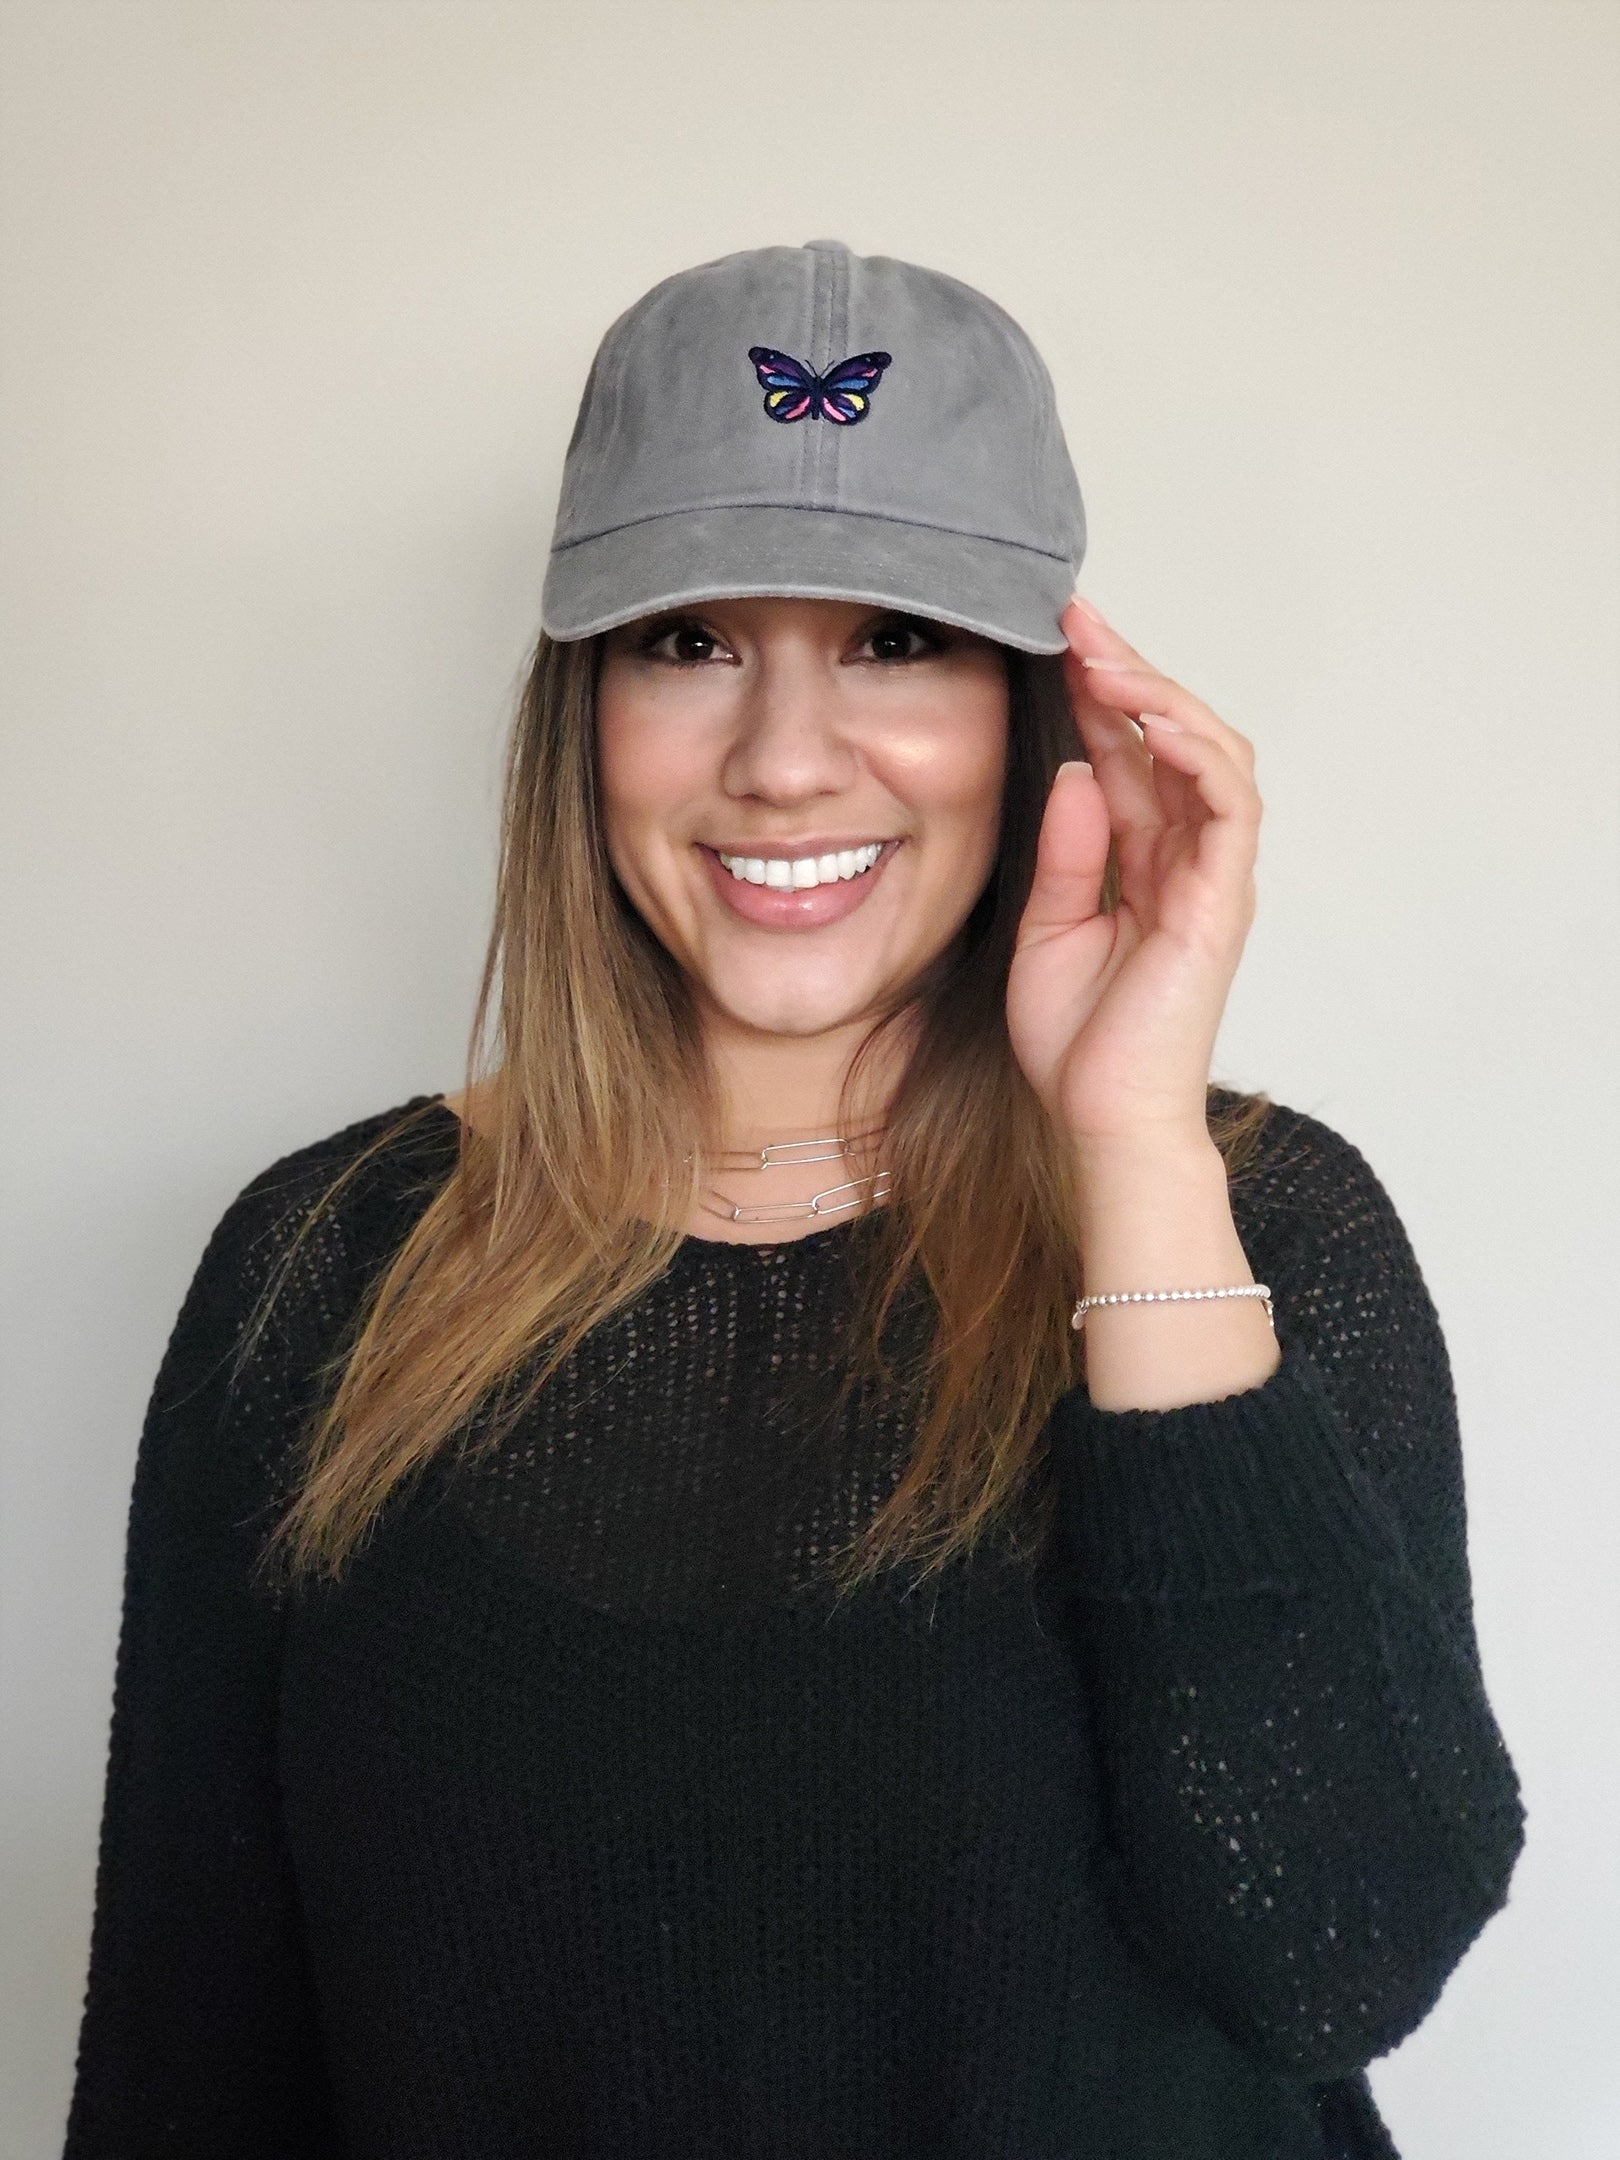 Embroidered Colorful Butterfly Hat